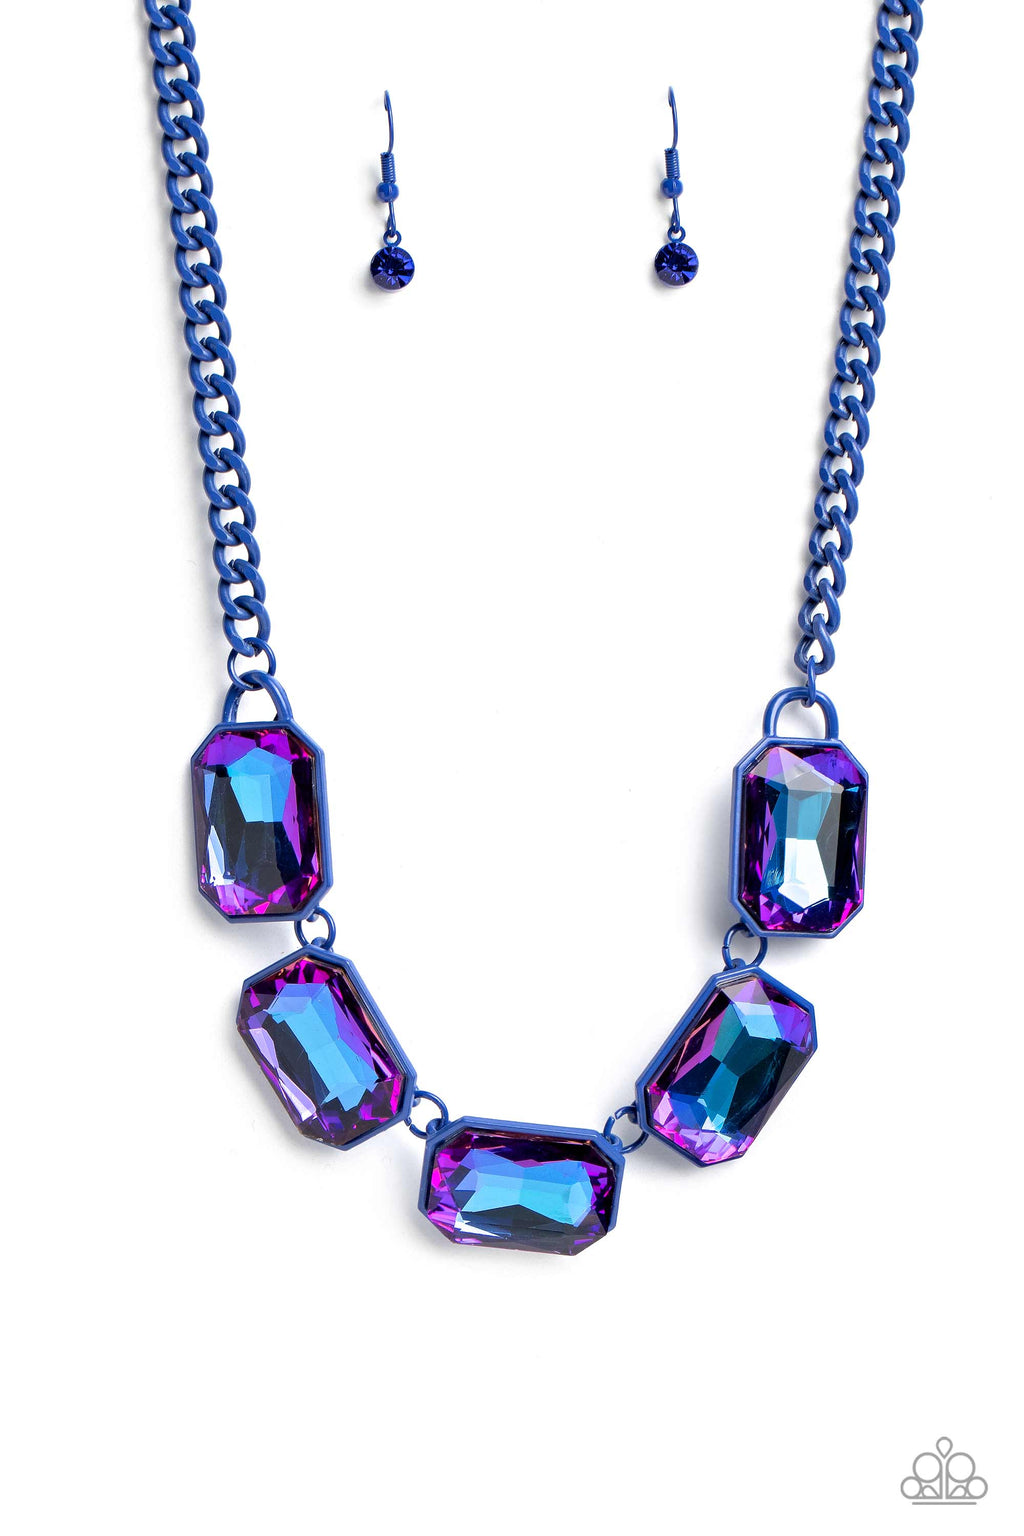 five-dollar-jewelry-emerald-city-couture-blue-necklace-paparazzi-accessories